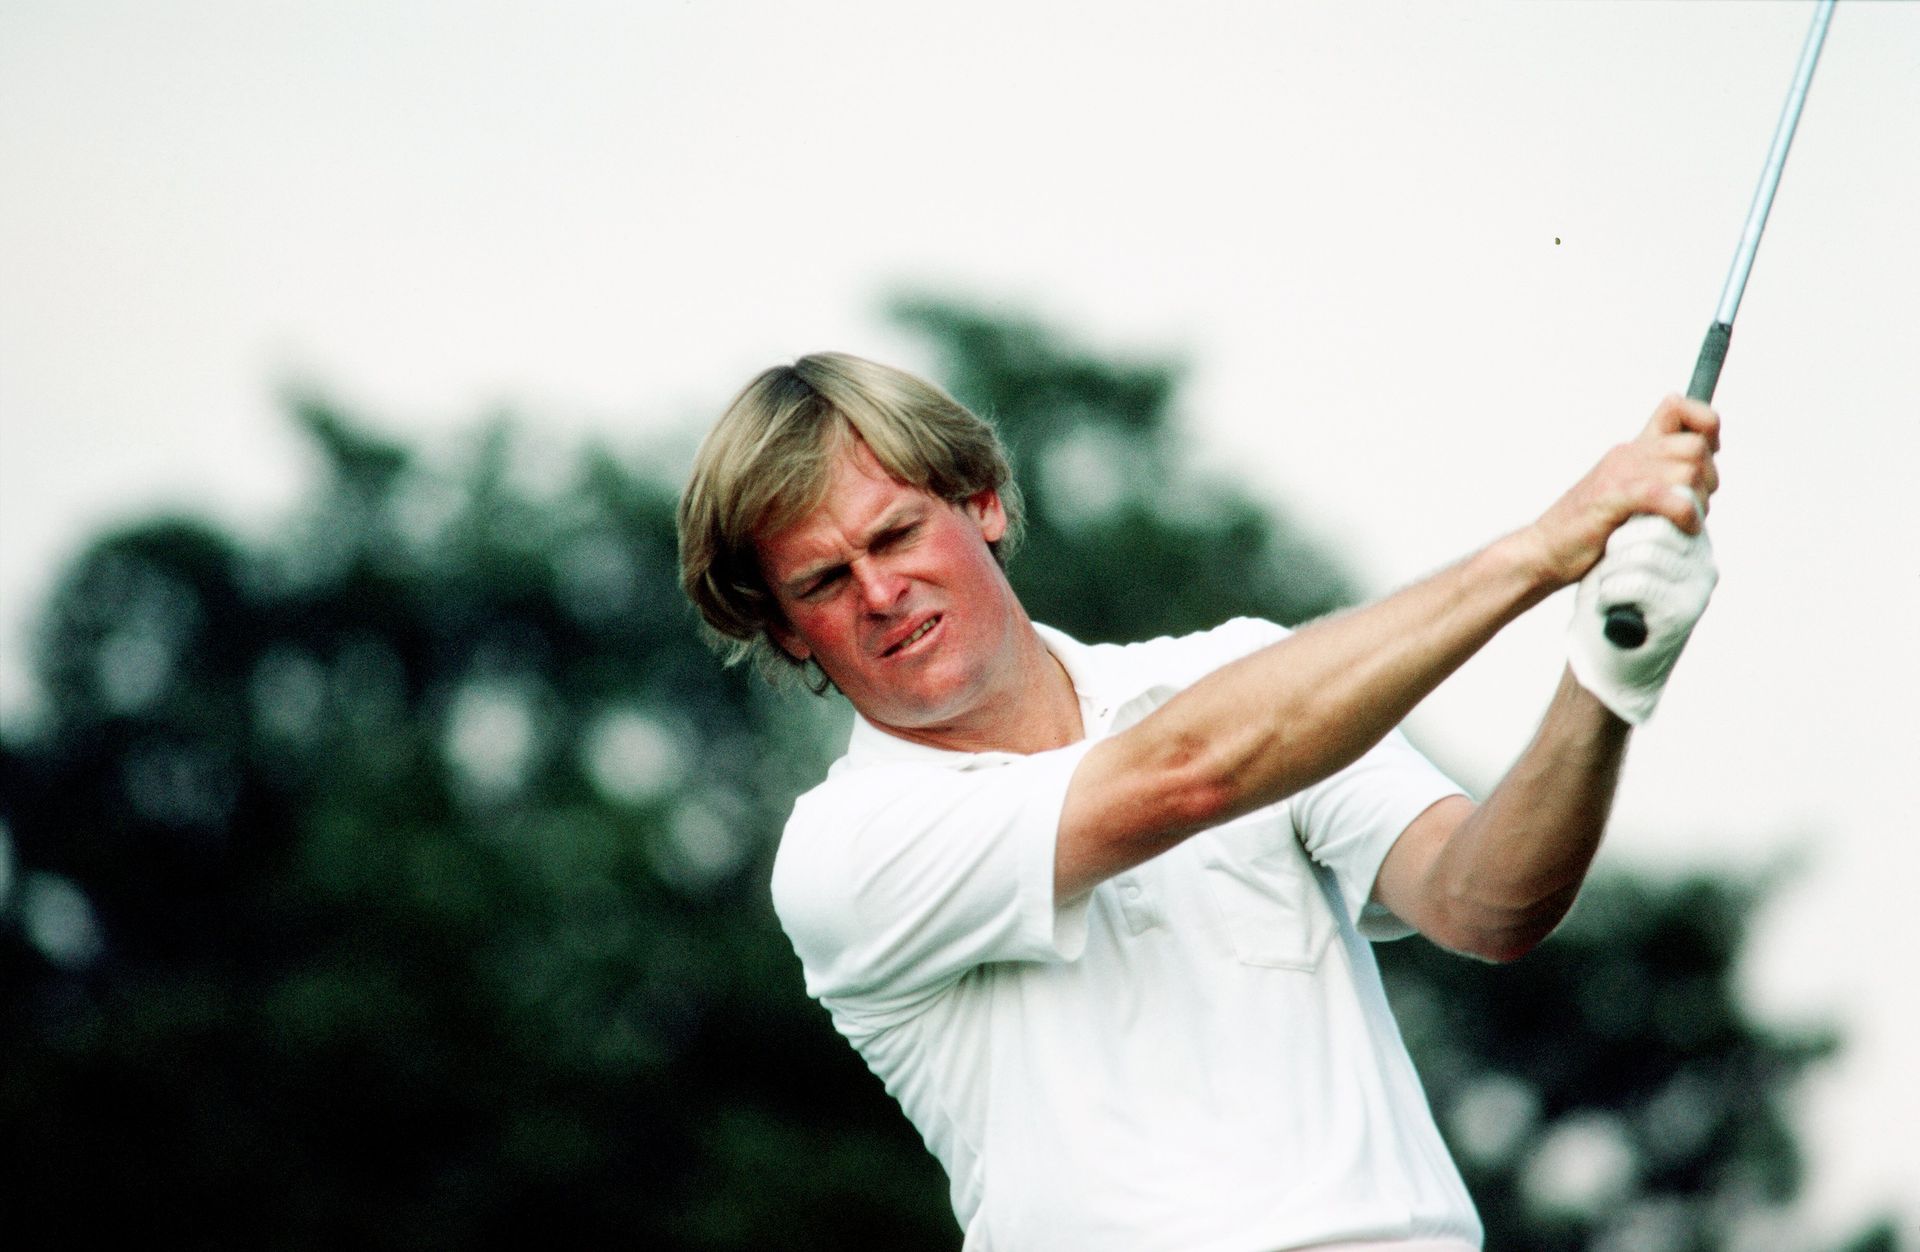 <p>                     In terms of iron play, there have fewer better strikers of the ball than Johnny Miller. Not only was the 25-time PGA Tour winner extremely powerful, his timing was exemplary, and his long irons rarely anything other than deadly accurate. From 1971 to 1976, Miller won 18 times, including two Major Championships, one of which included a final-round 63 at Oakmont. Yes, that Oakmont, one of the hardest courses in America.                   </p>